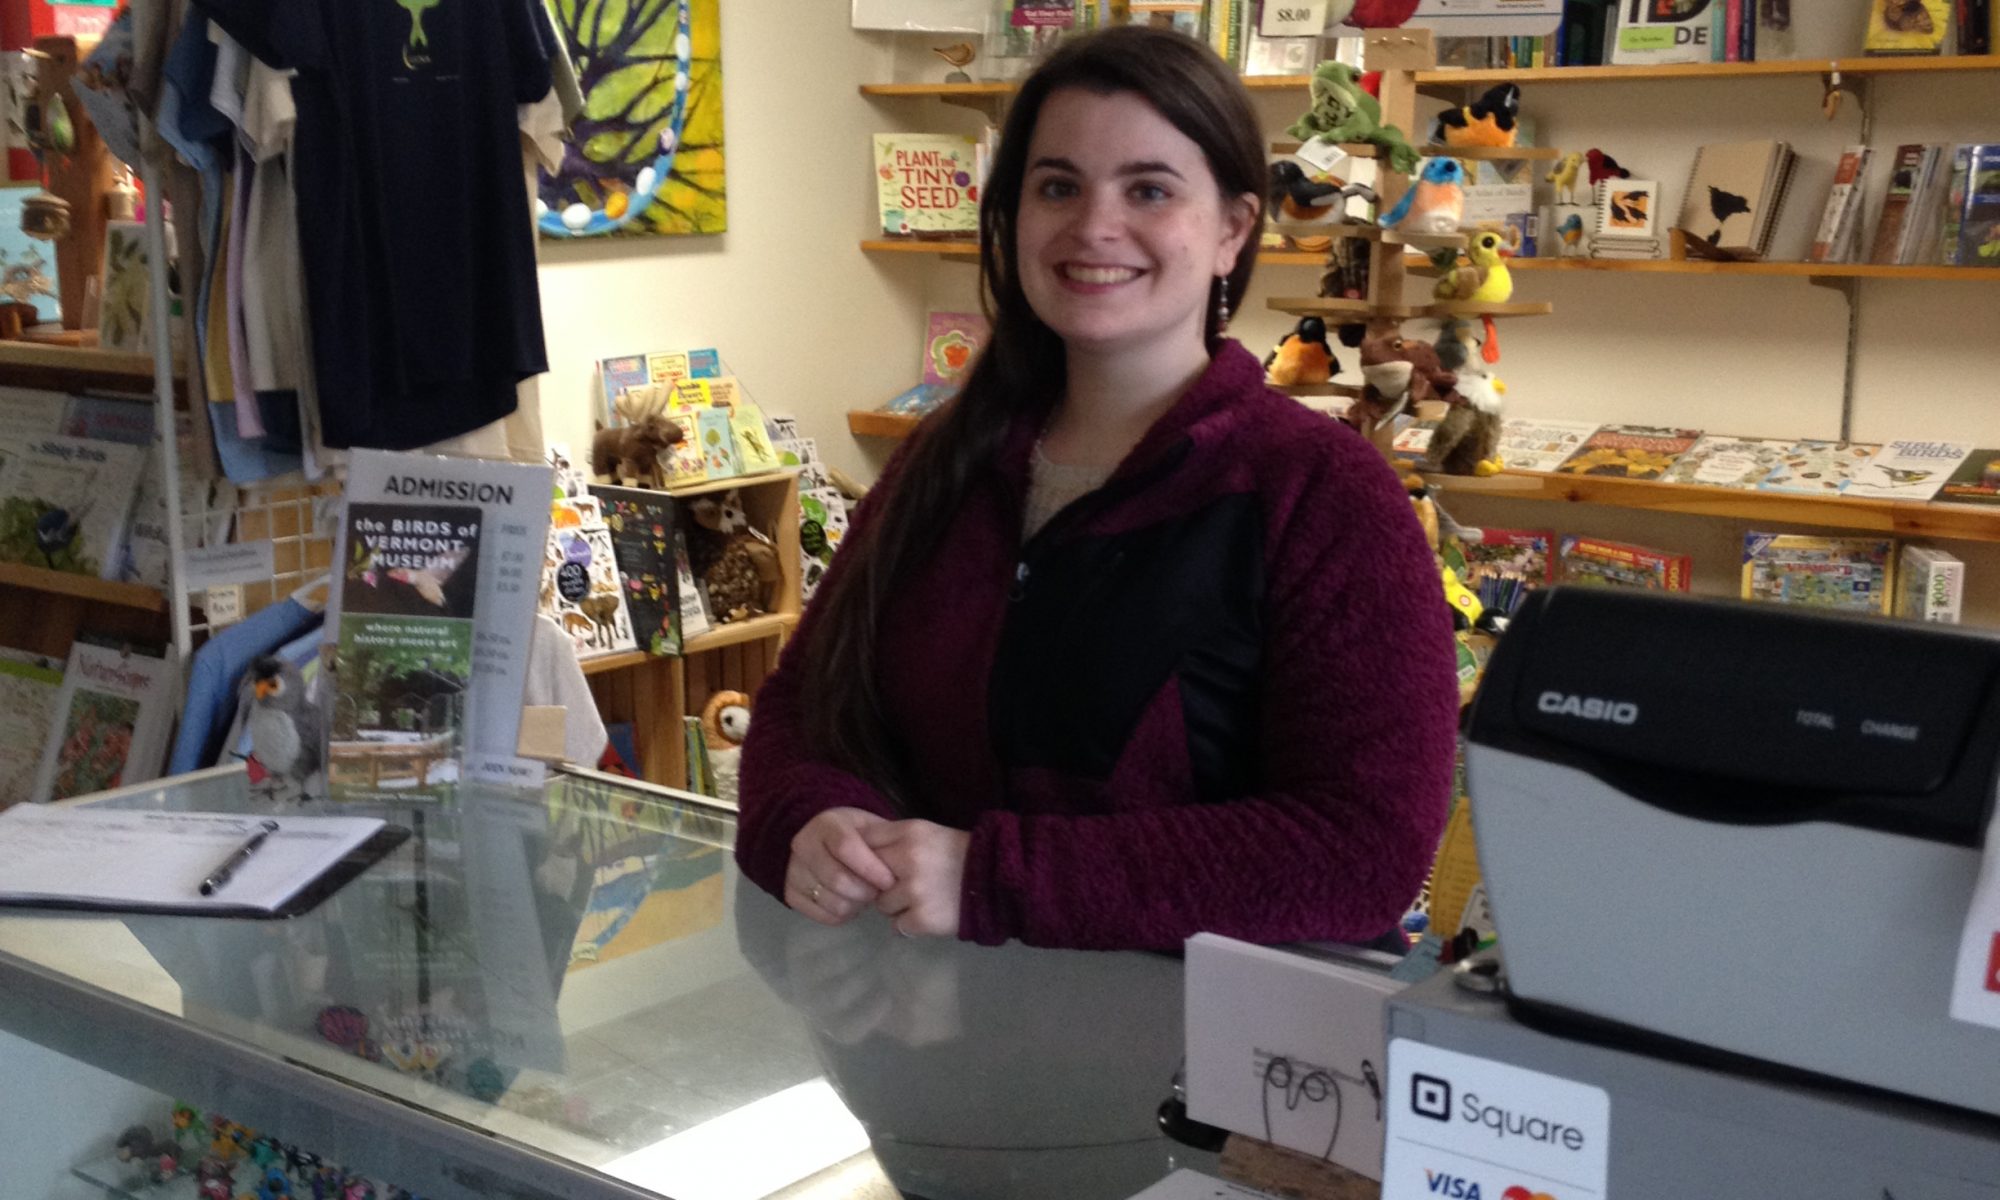 A smiling woman at the Museum's front desk with the gift shop behind her.